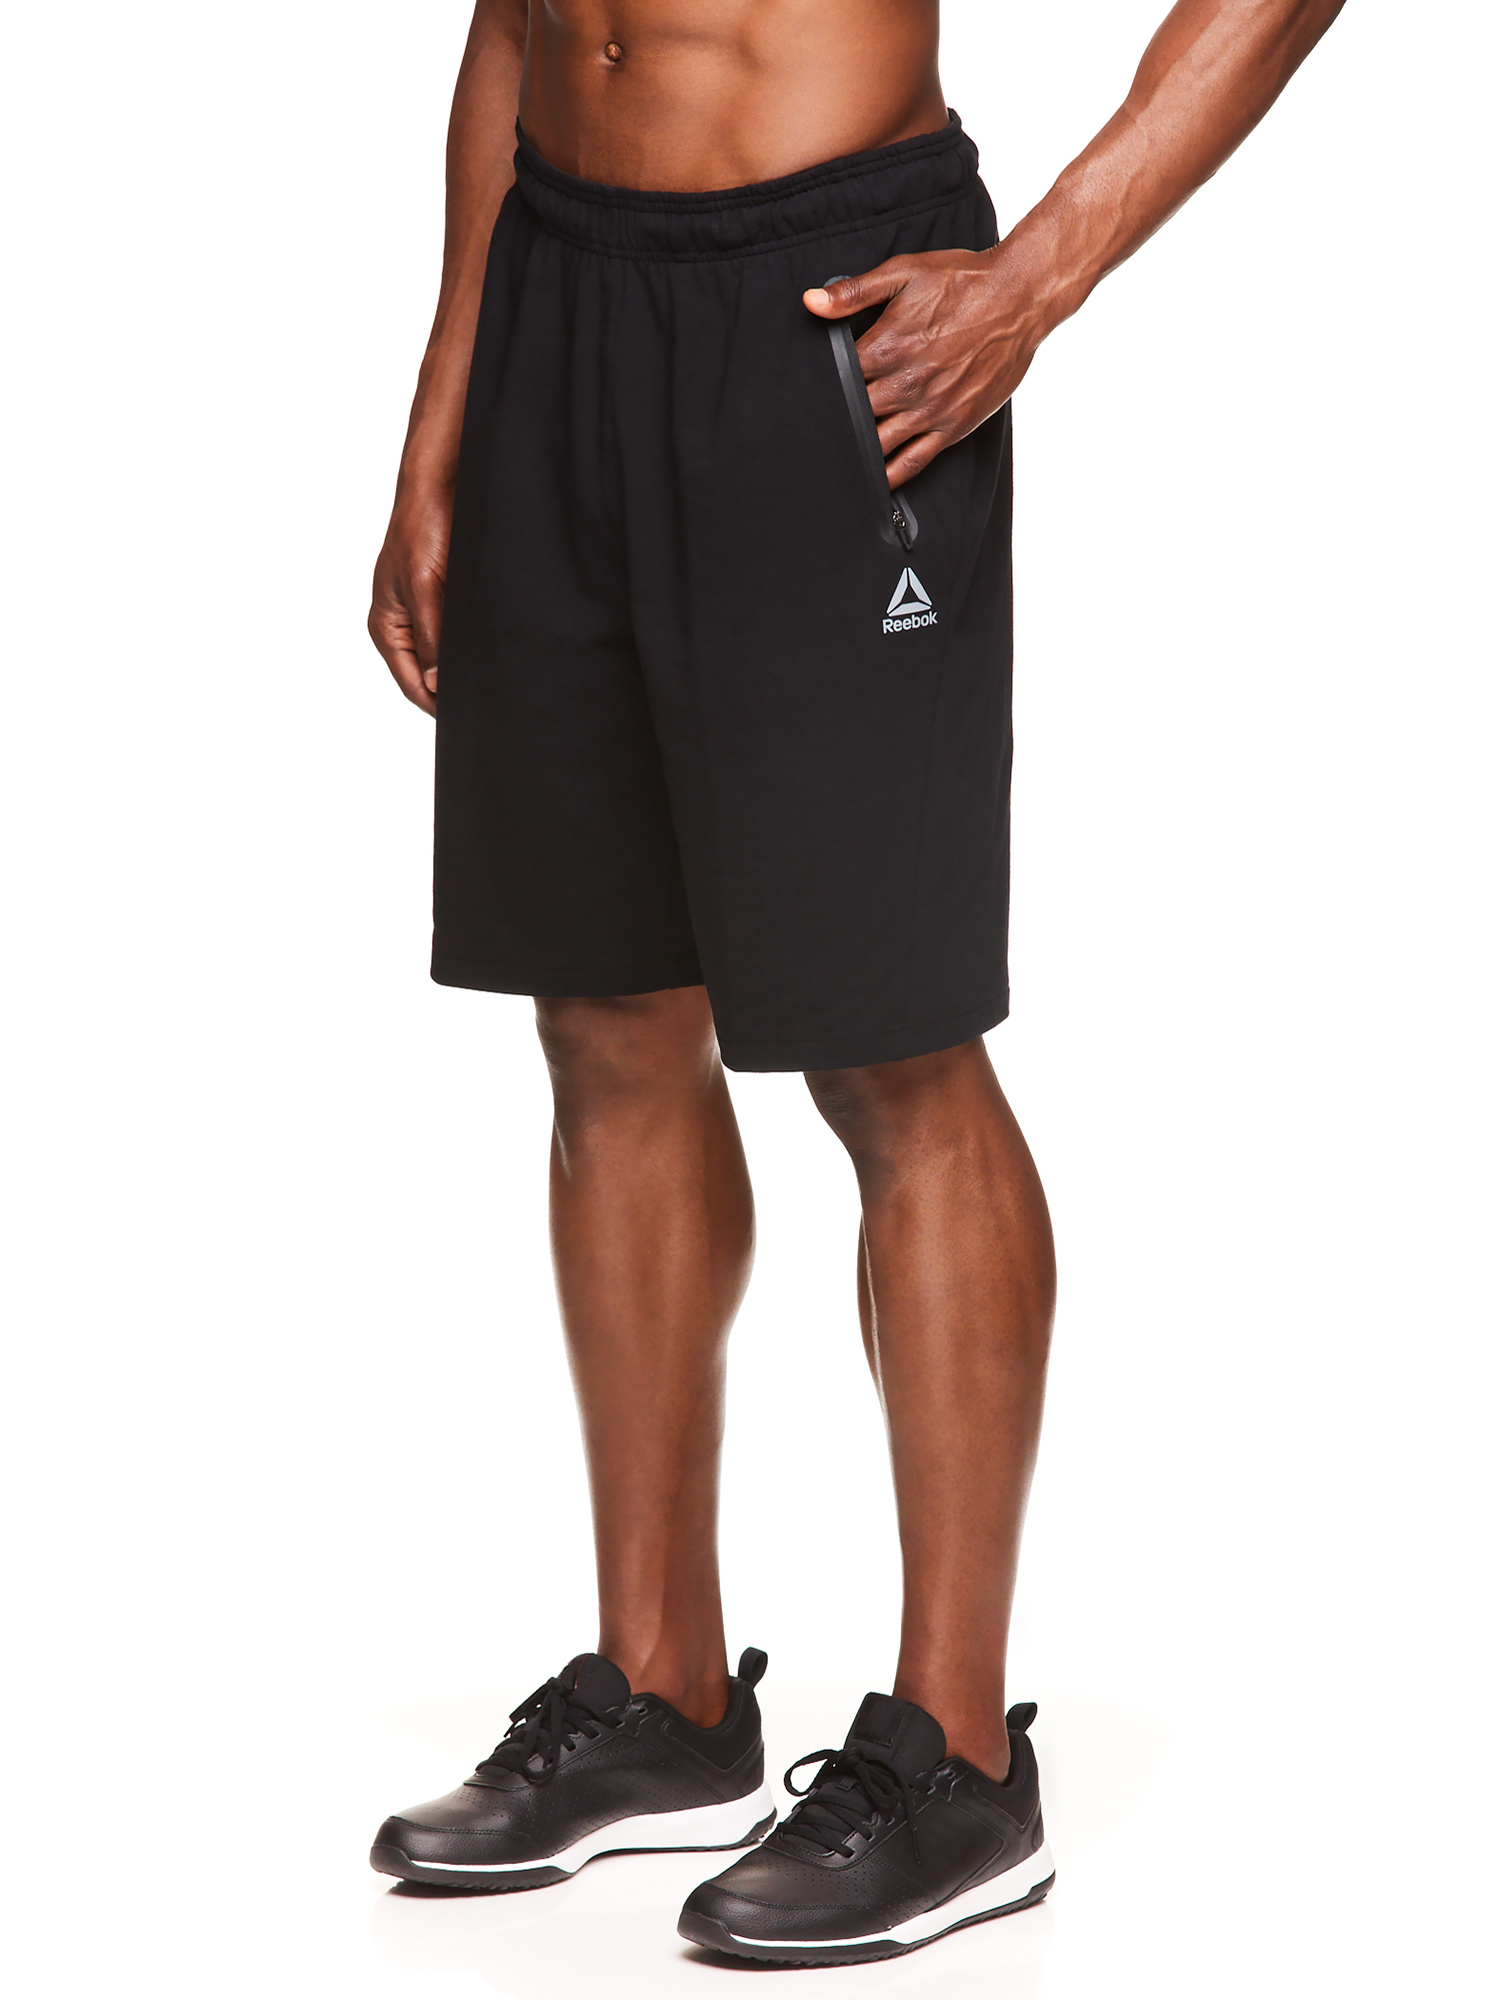 Reebok Men's and Big Men's Active Tech Terry Shorts, 10" Inseam Basketball Shorts, up to Size 3XL - image 4 of 4